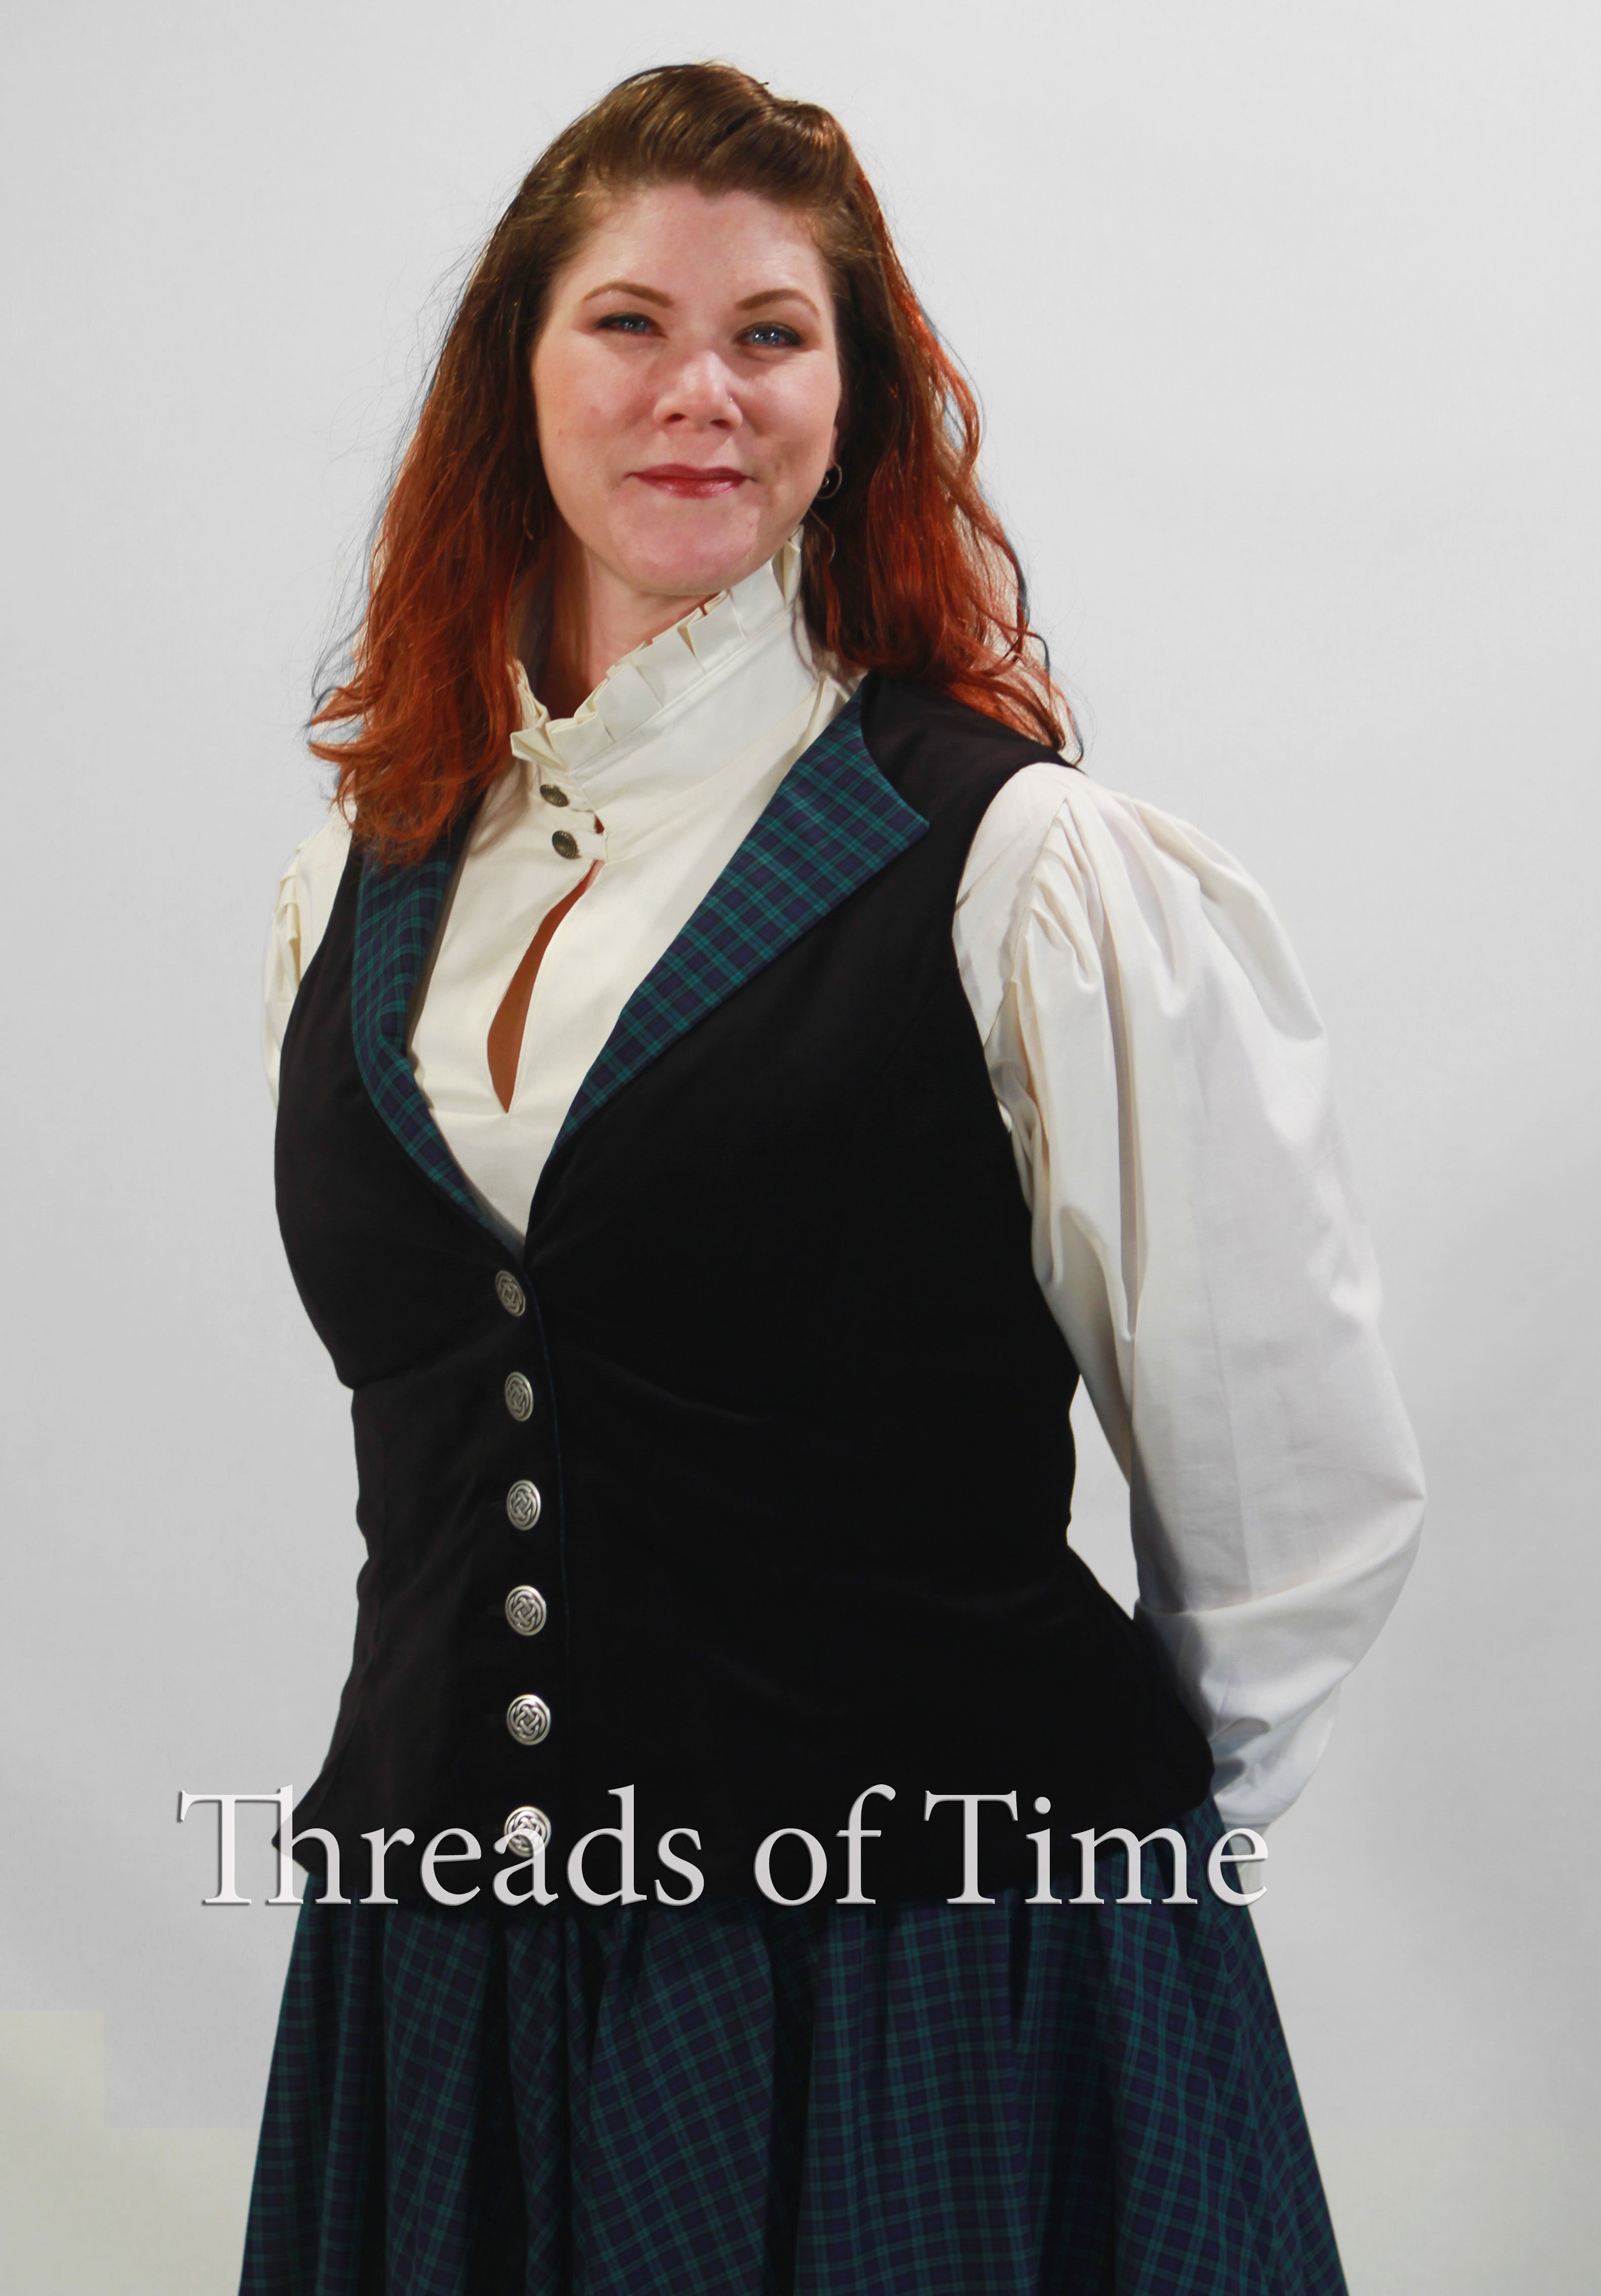 The steampunk Clock – Grim Haven Clothing